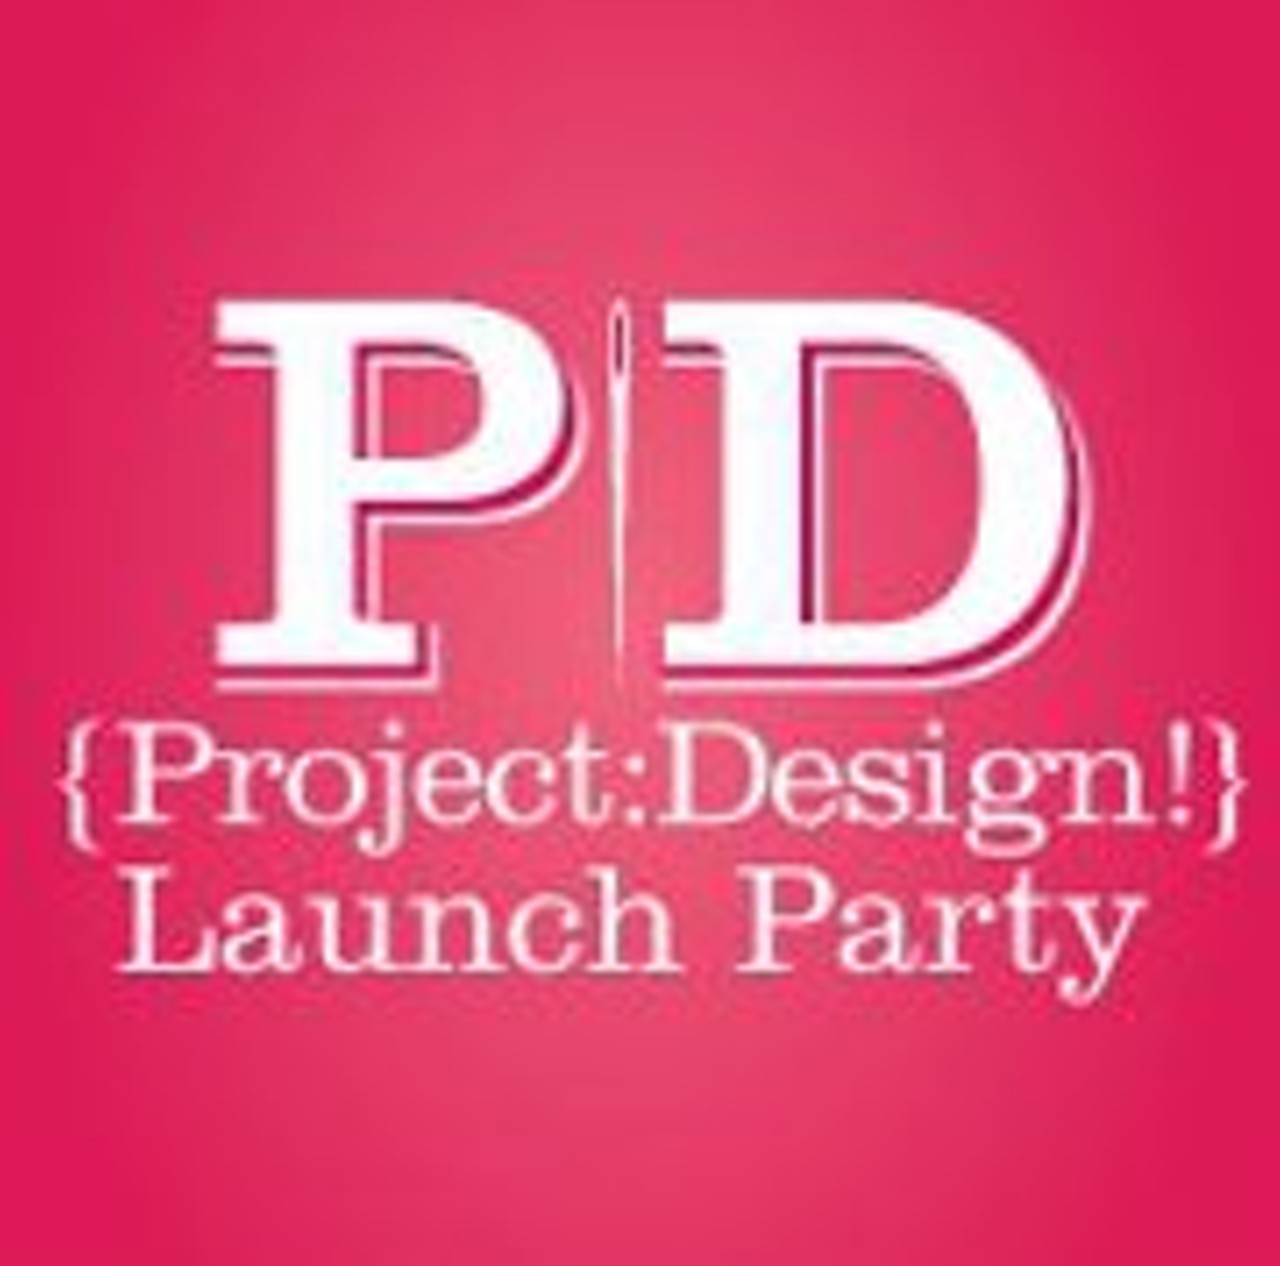 The Project Design Launch Party